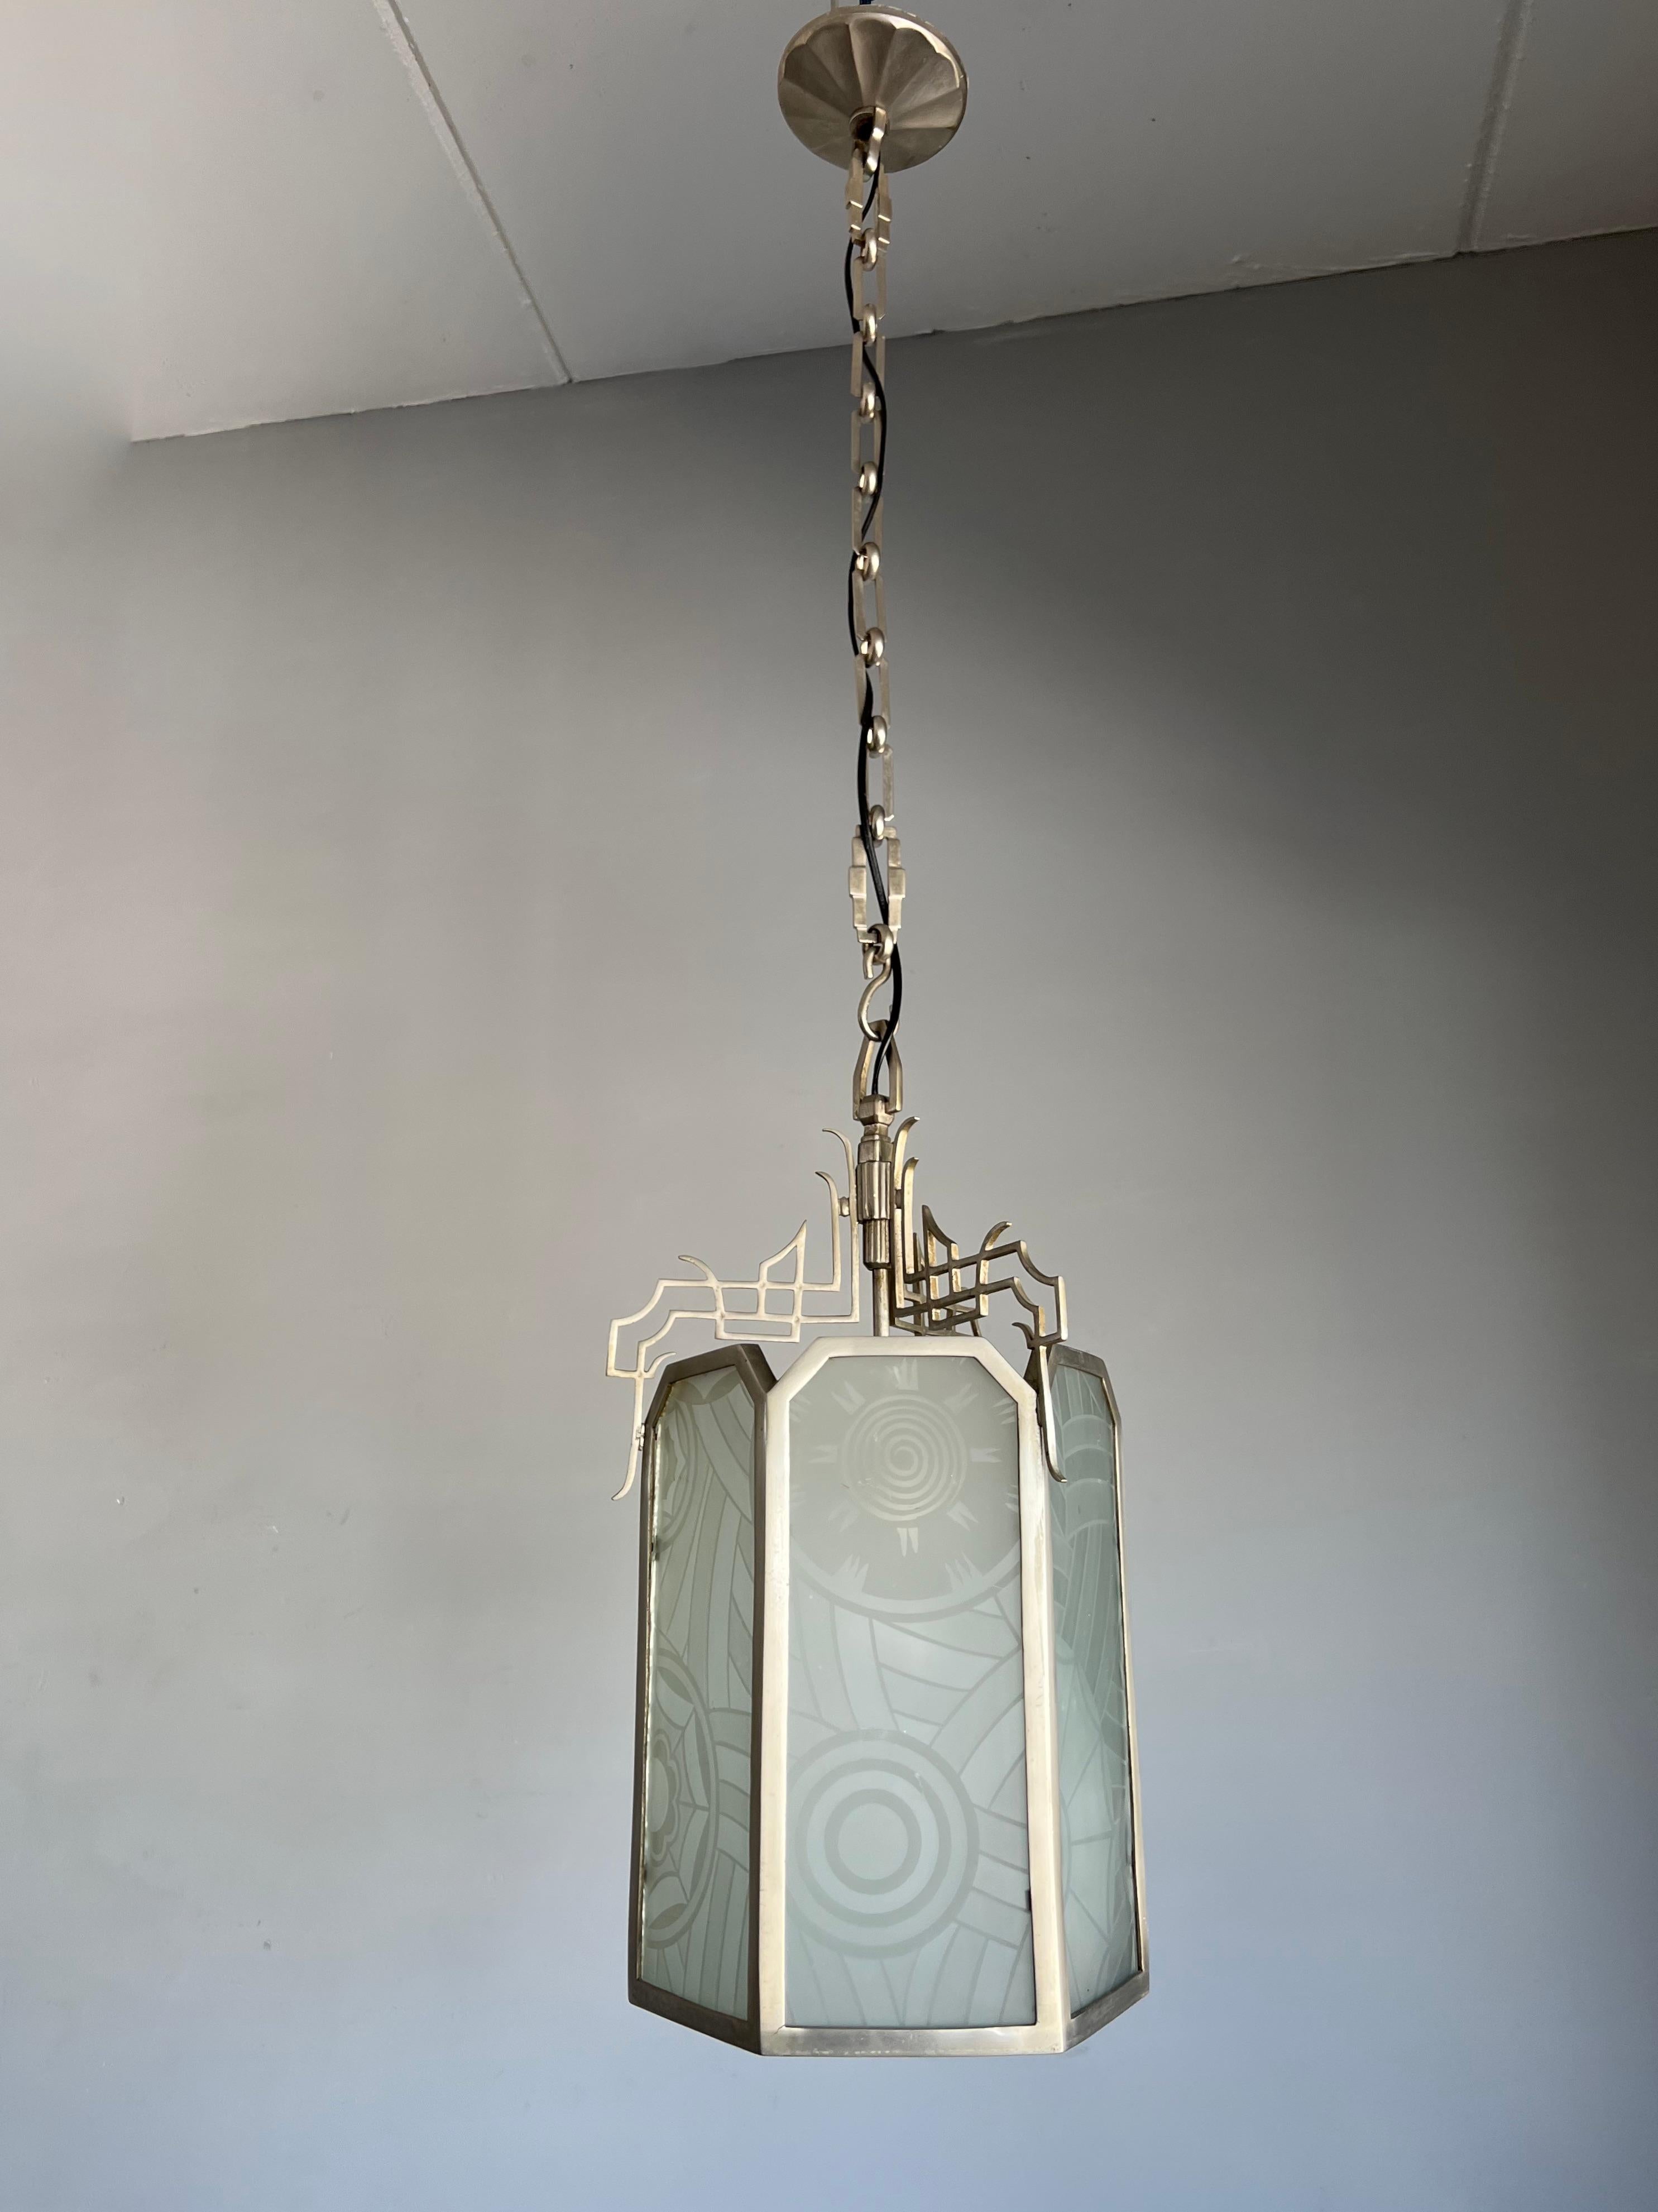 Stunning all handcrafted brass Art Deco pendant with rare engraved, art glass panels.

If you are looking for the ideal pendant to light up your Art Deco (inspired) entrance, bedroom or landing then this handcrafted beauty could be perfect. This